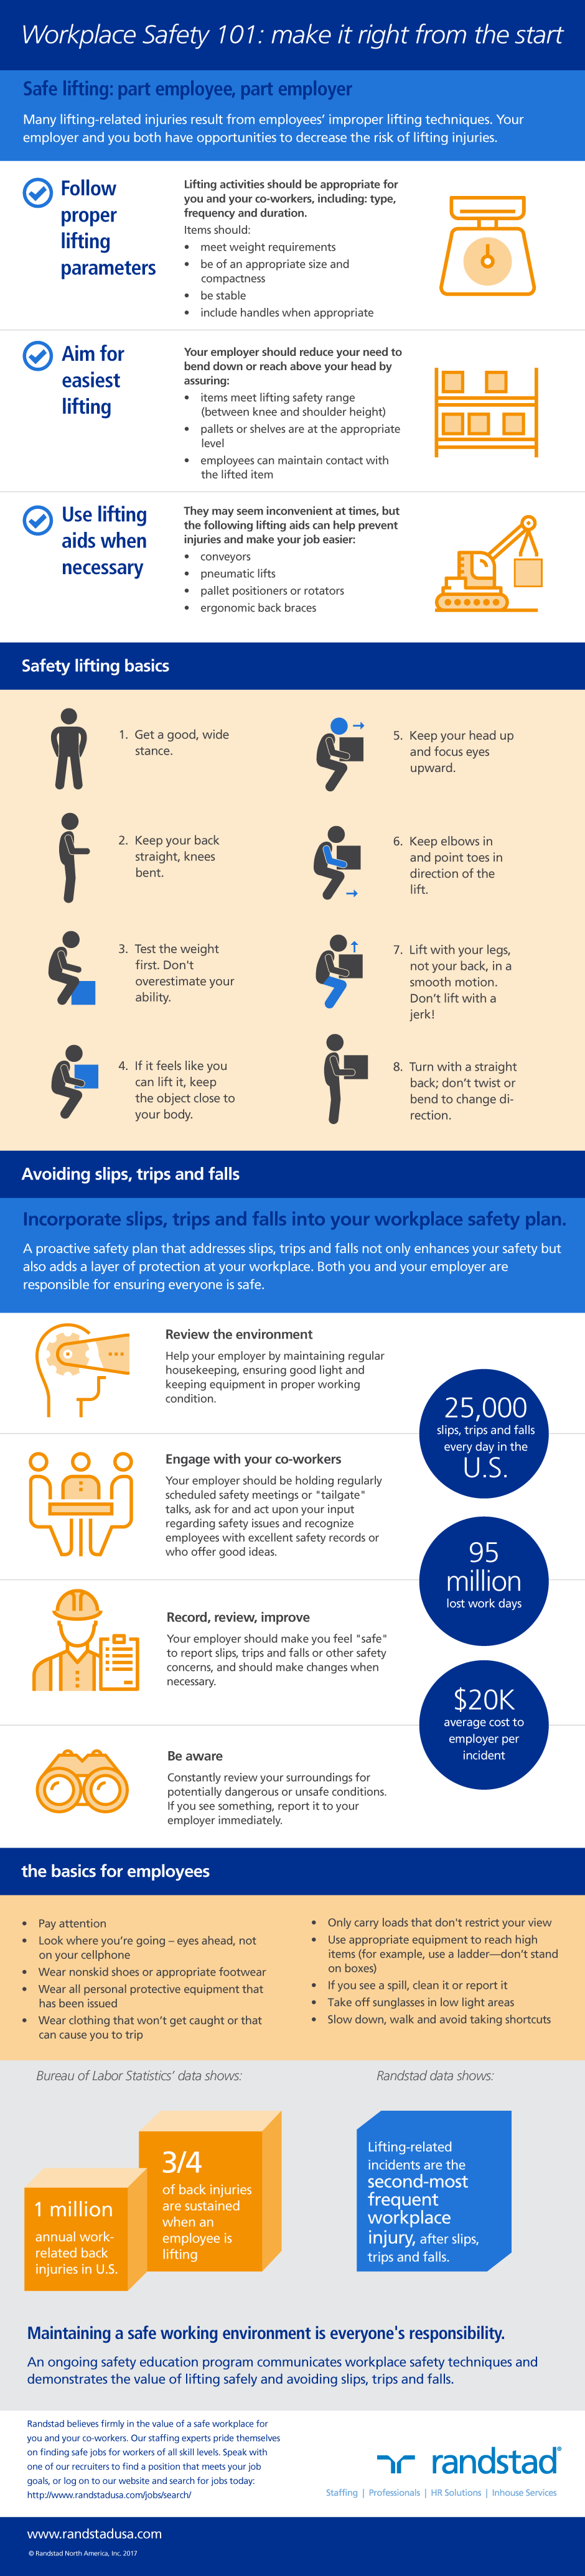 Workplace Safety 101 Infographic